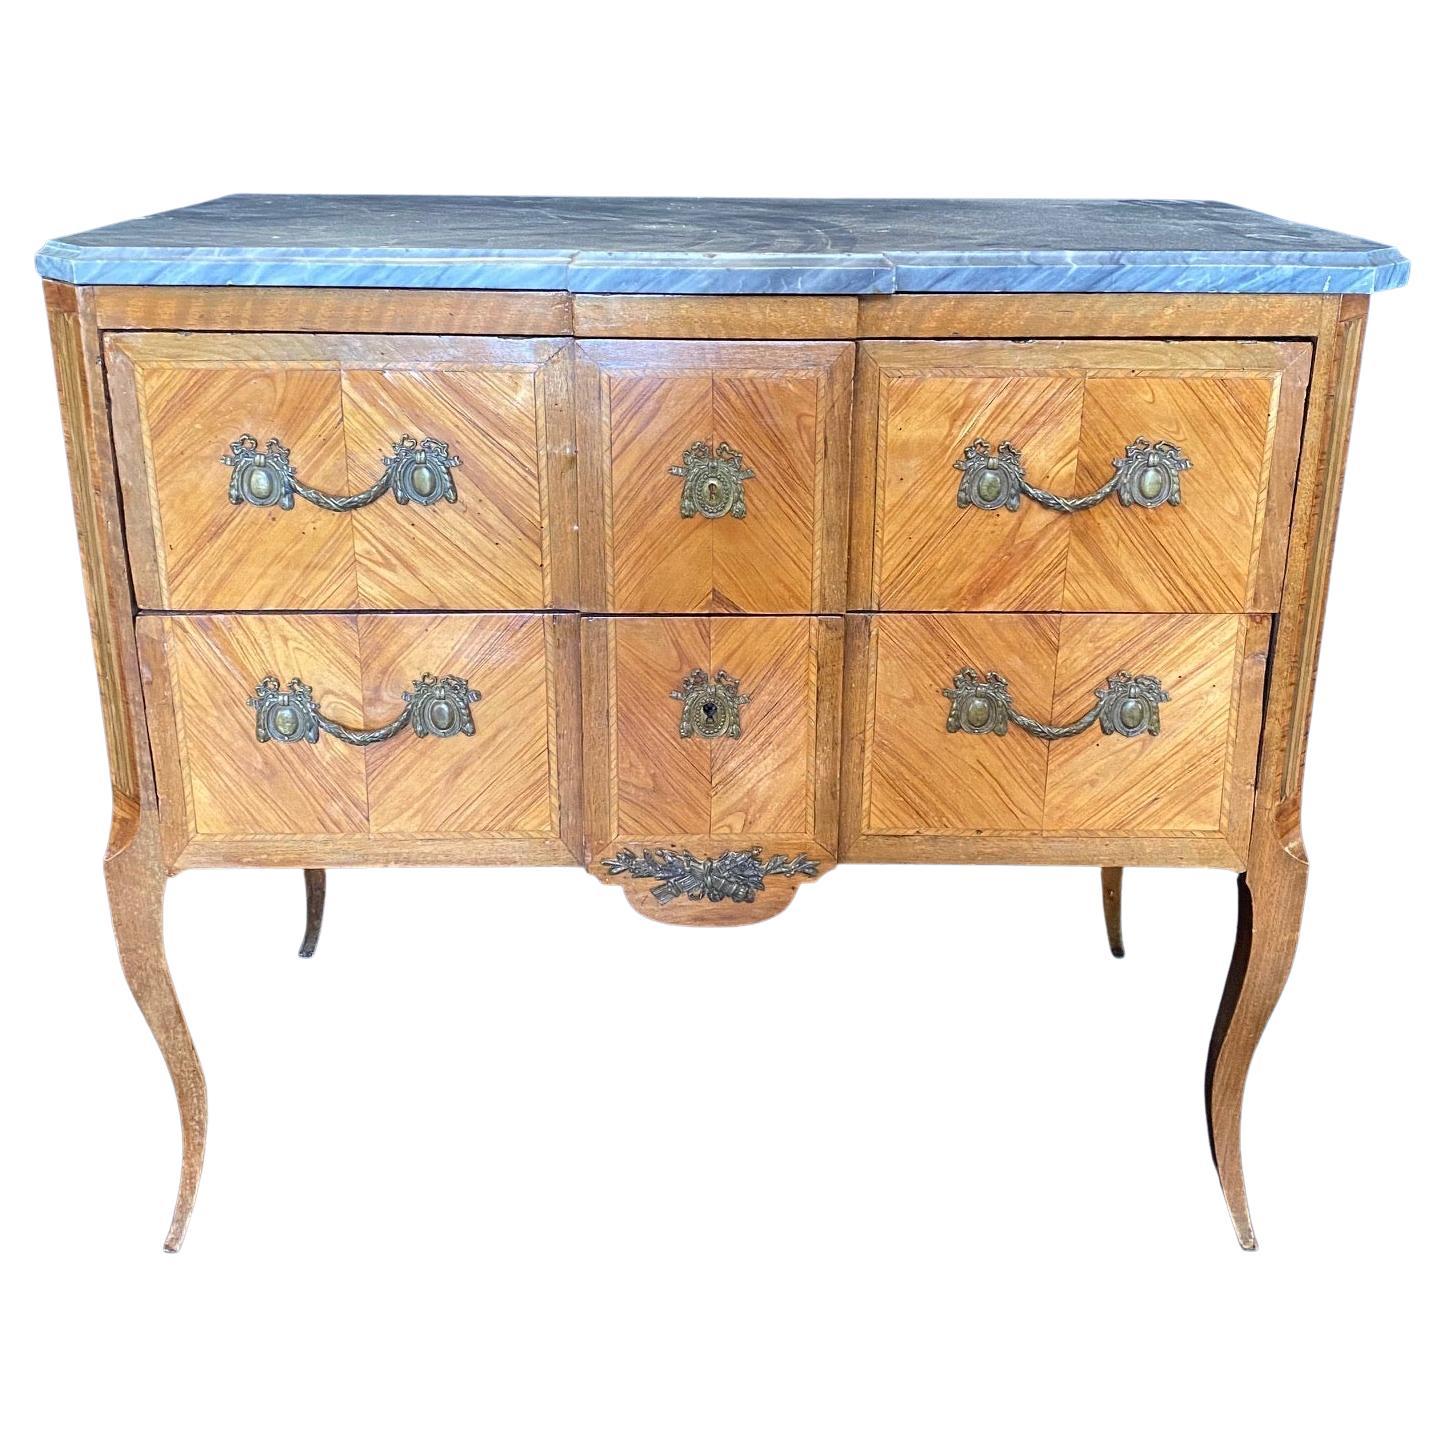 Exquisite Inlaid 19th Century French Chest of Drawers with Ormolu Mounts